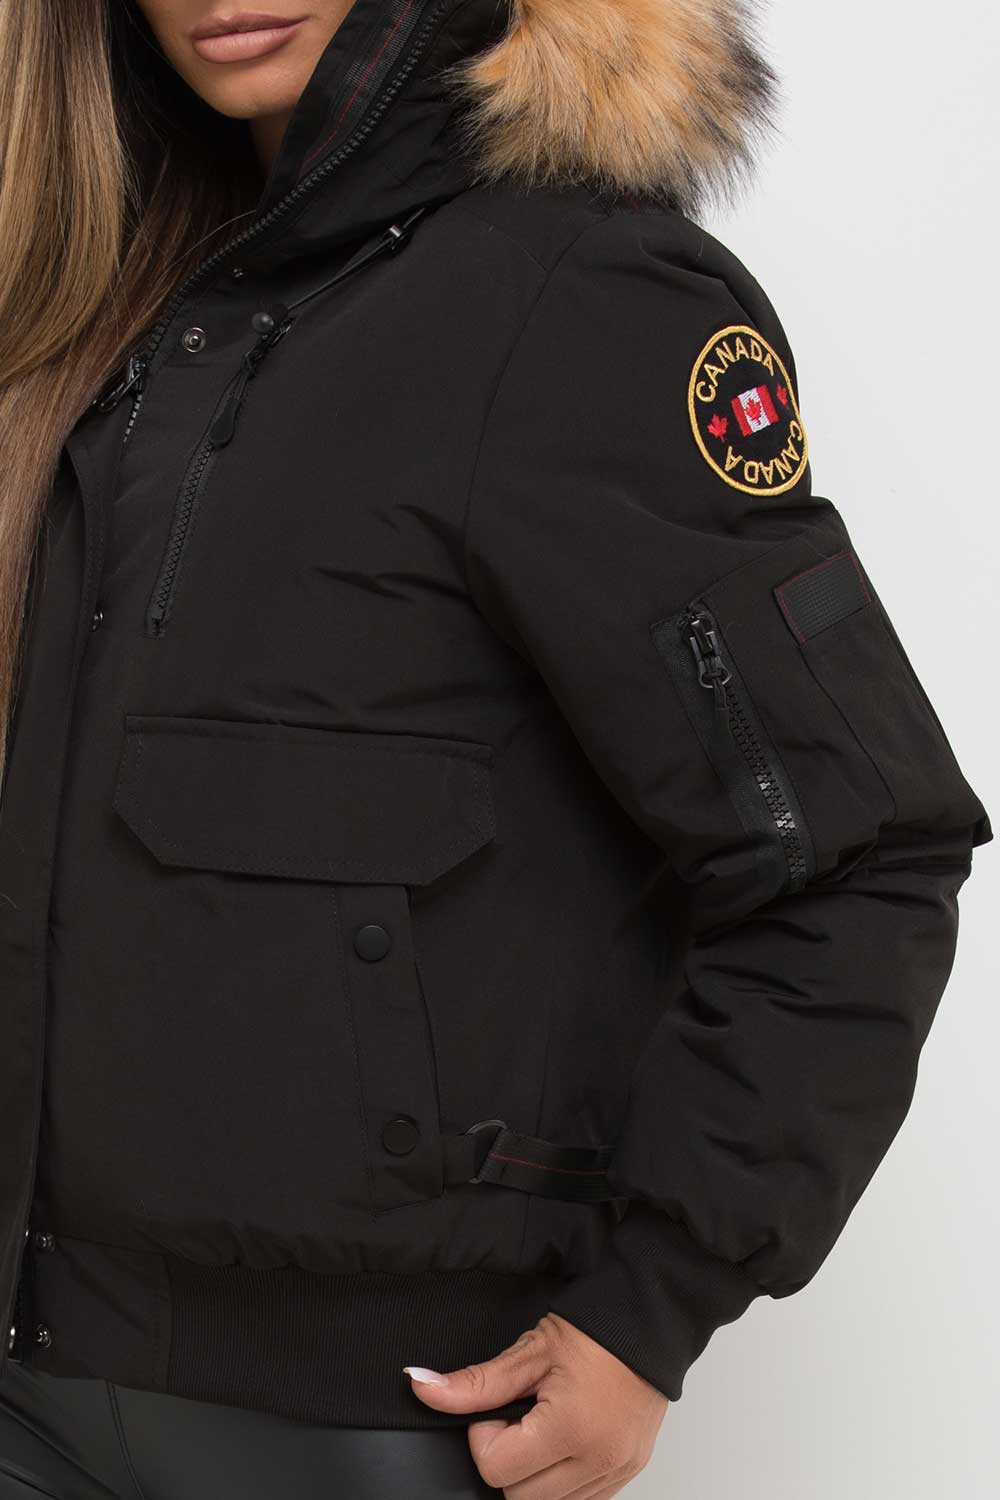 Women's Black Bomber Jacket With Fur Hood Canada Goose Inspired ...